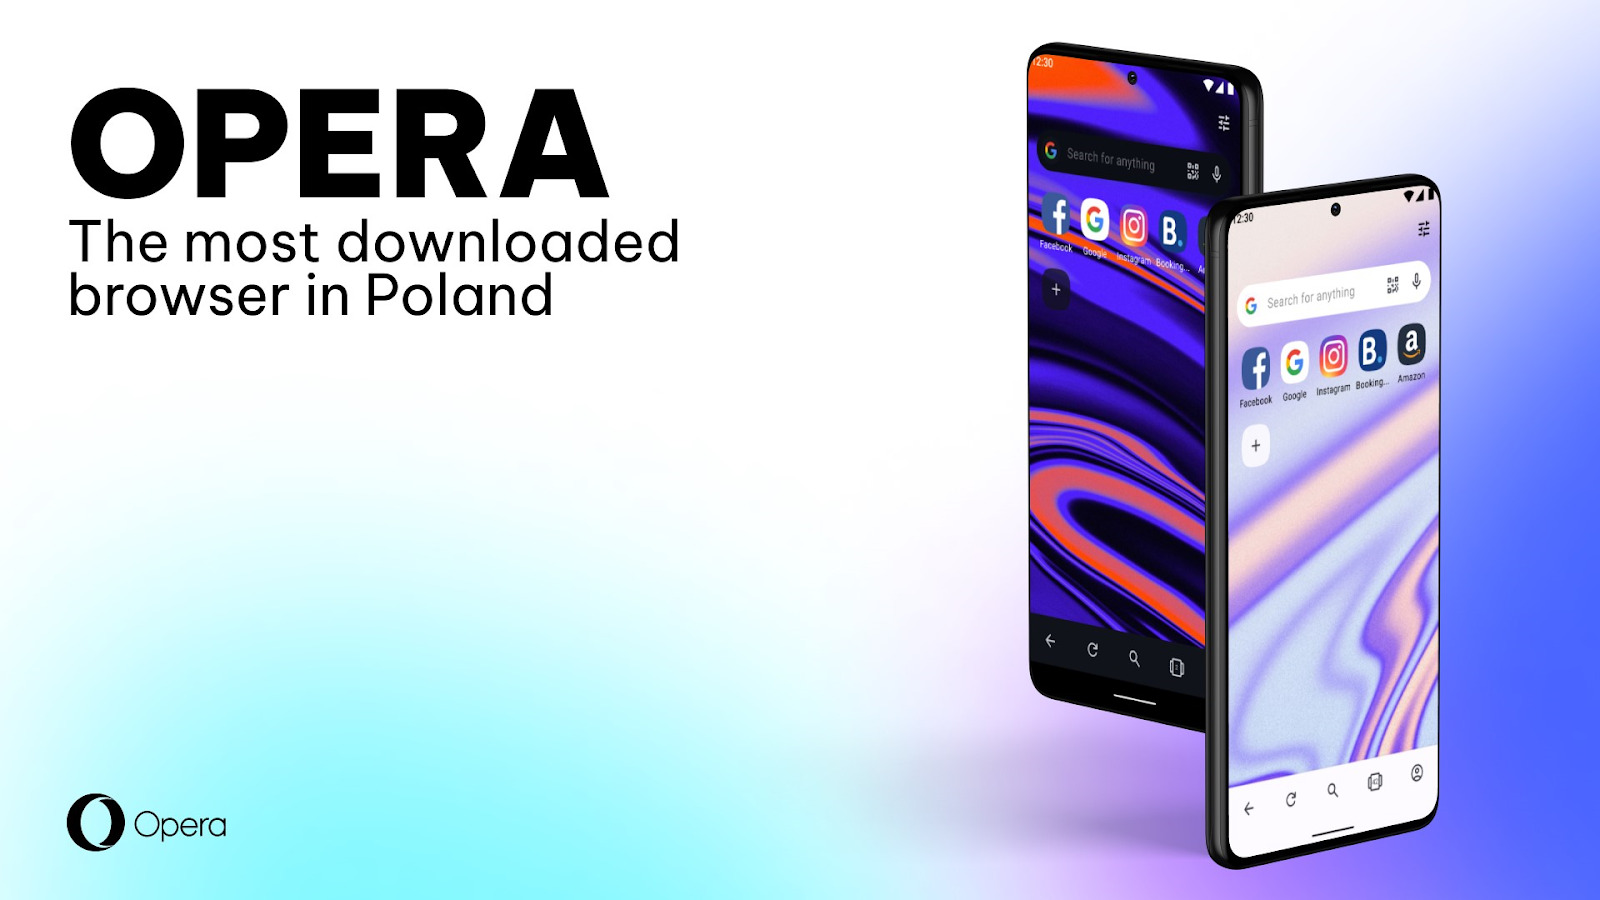 Two phone screens show Opera for Android, the most downloaded browser in Poland!